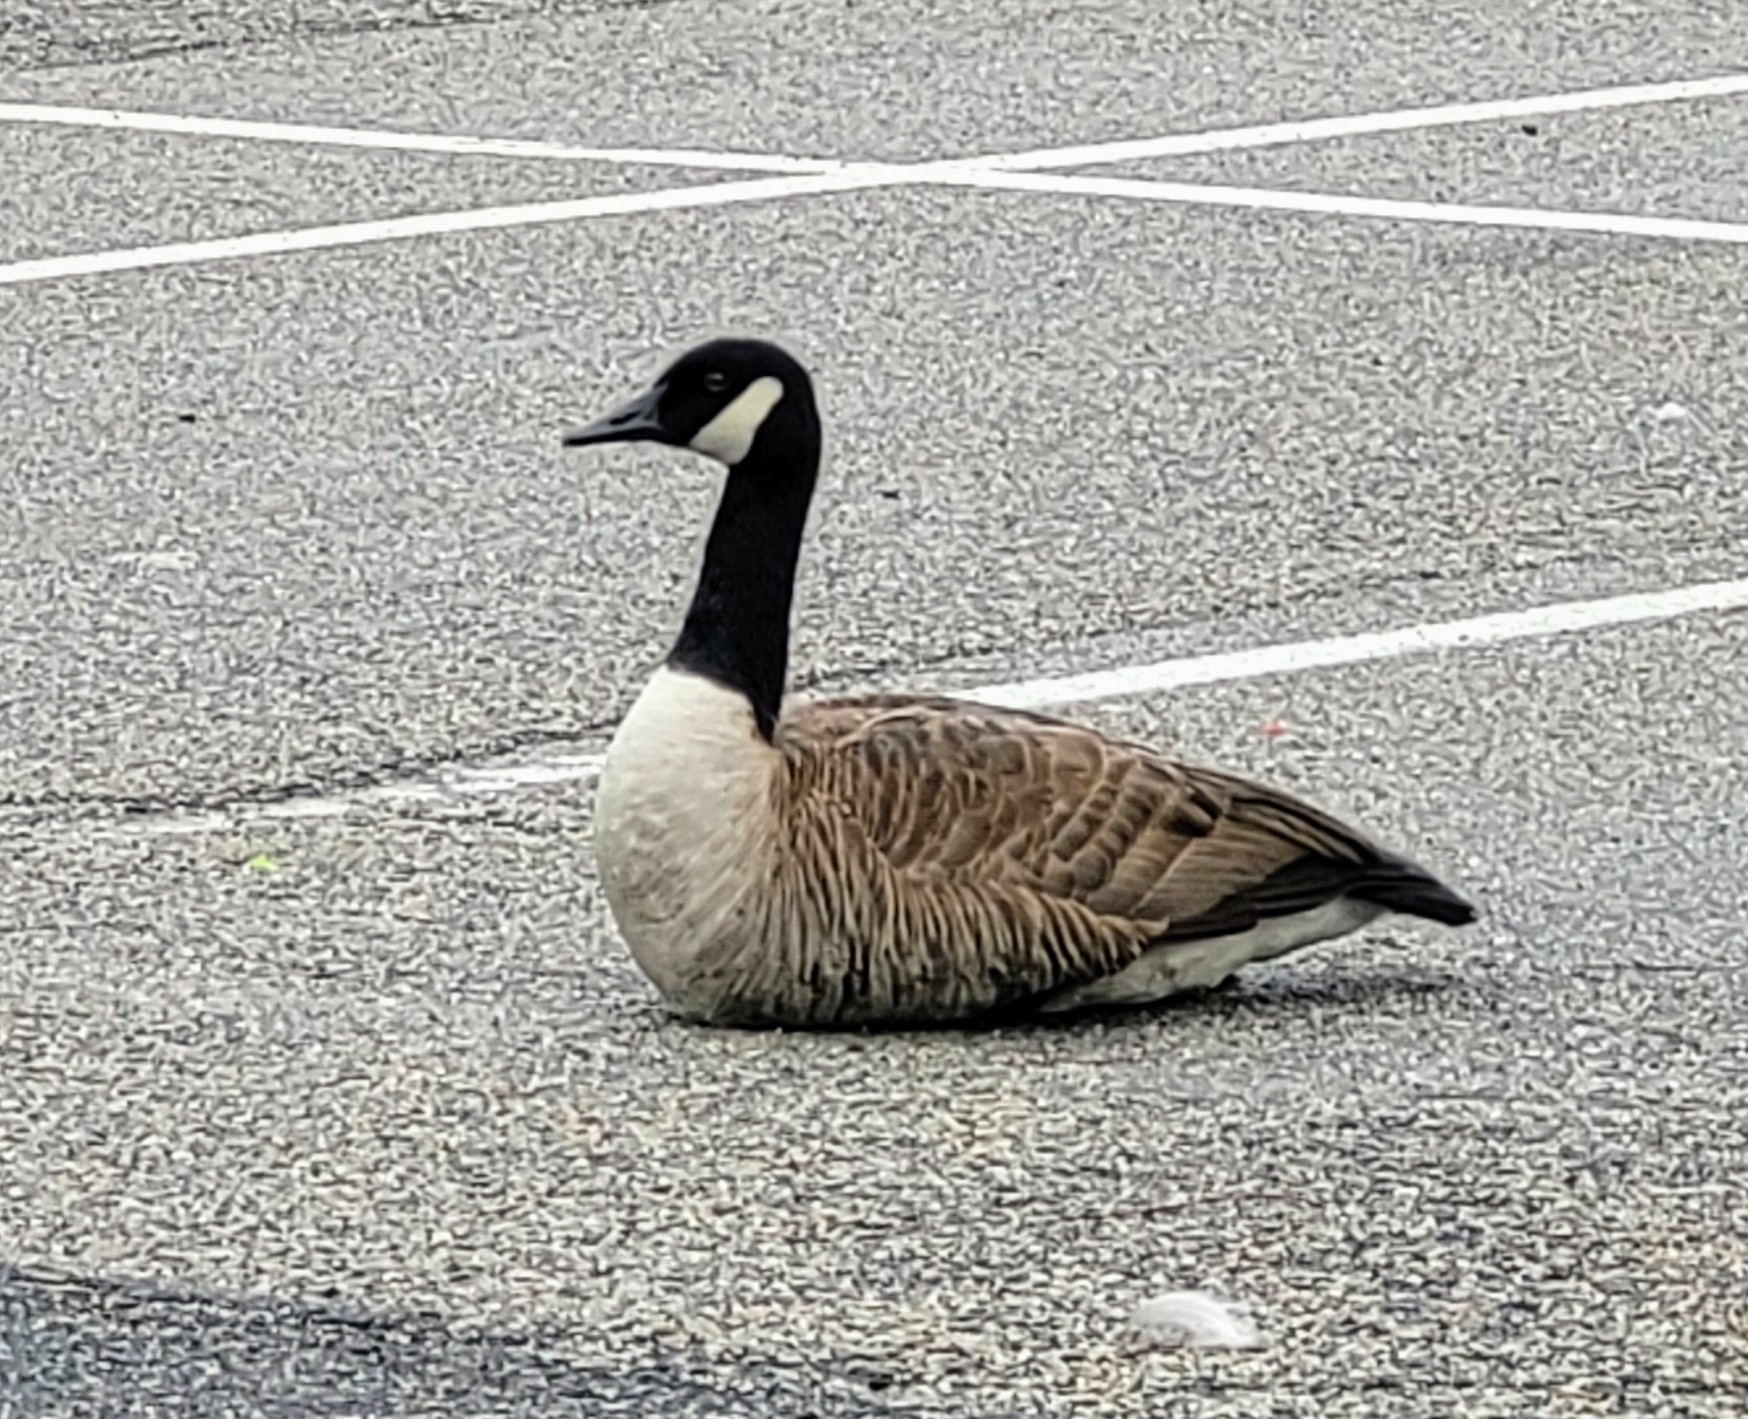 A single Canadian Goose, sitting in a parking space at the farmers market